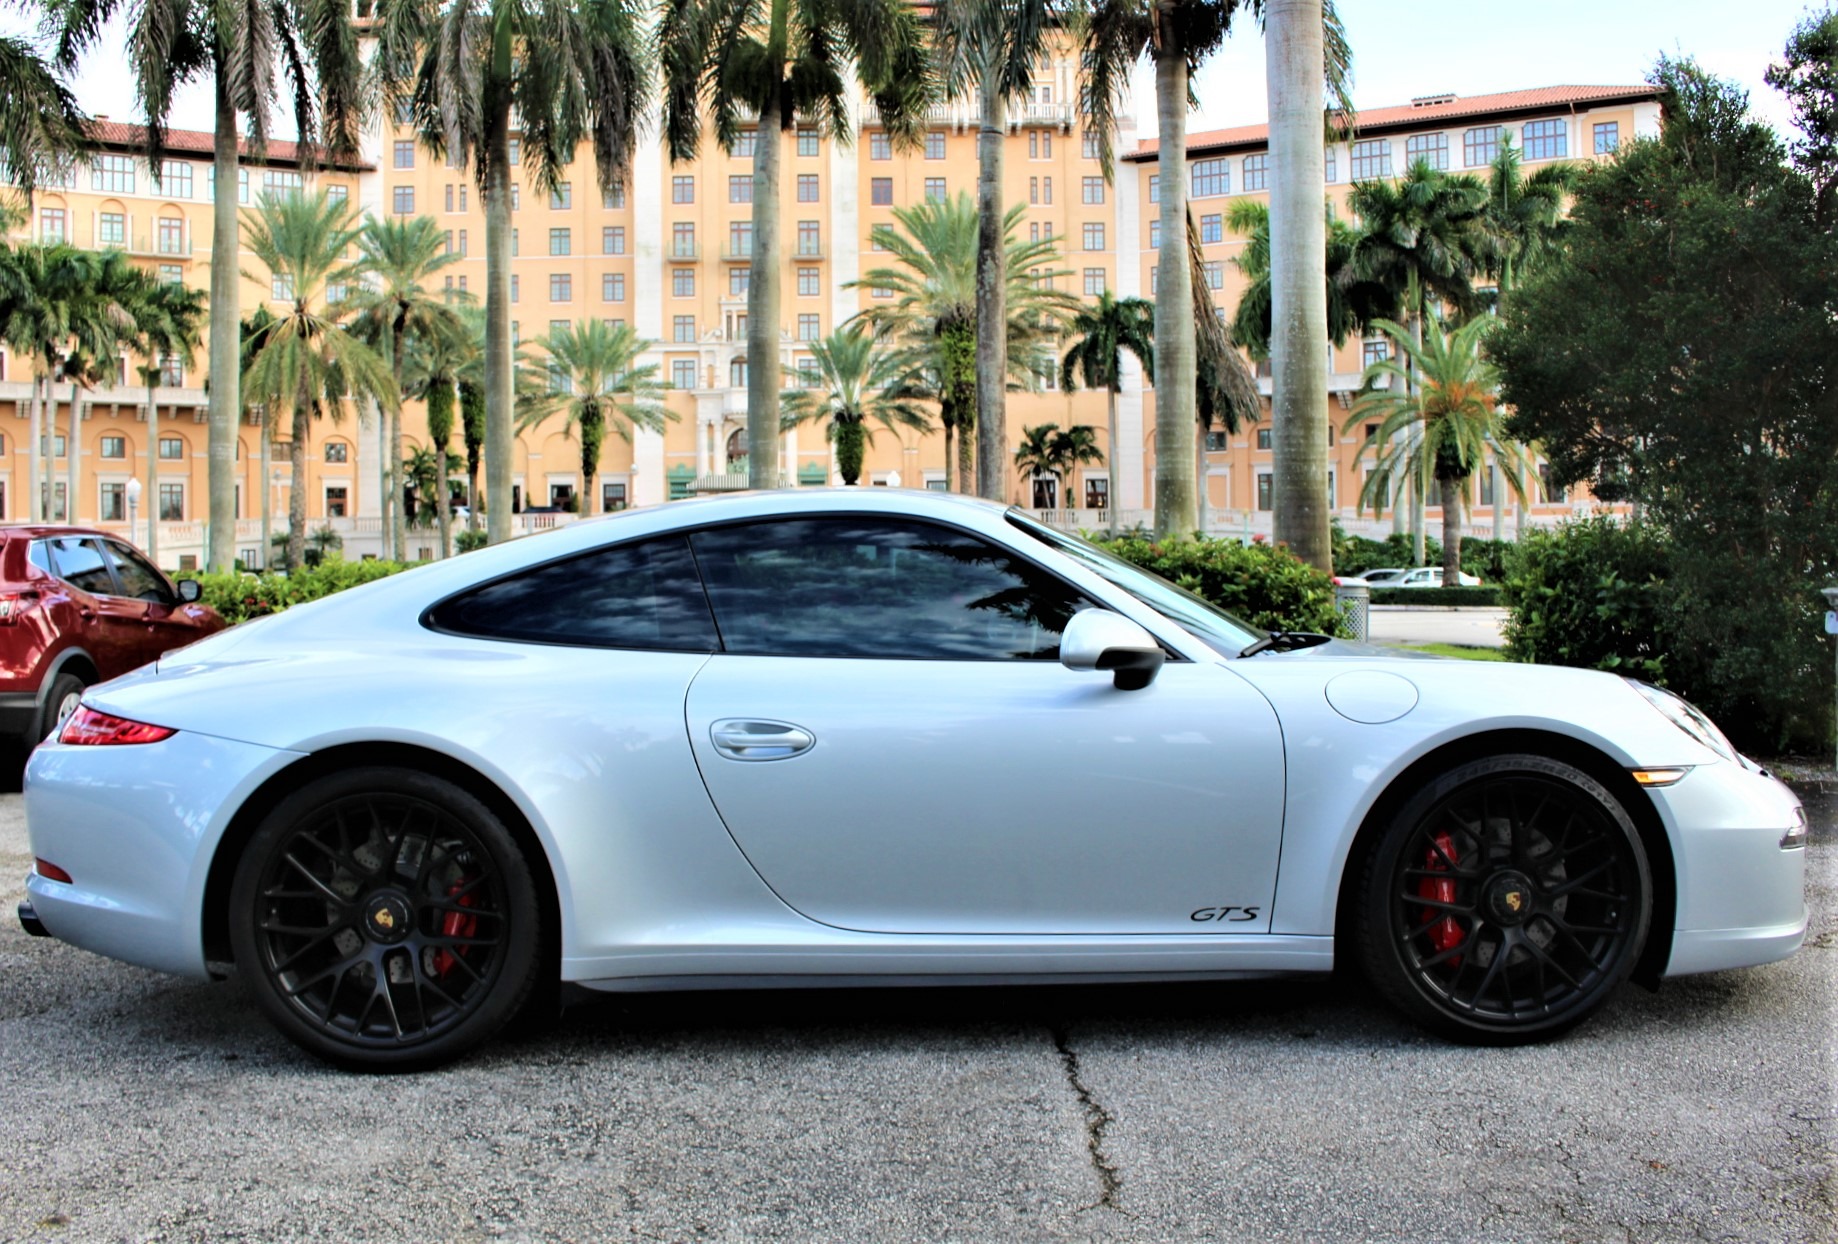 Used 2015 Porsche 911 Carrera GTS for sale Sold at The Gables Sports Cars in Miami FL 33146 2